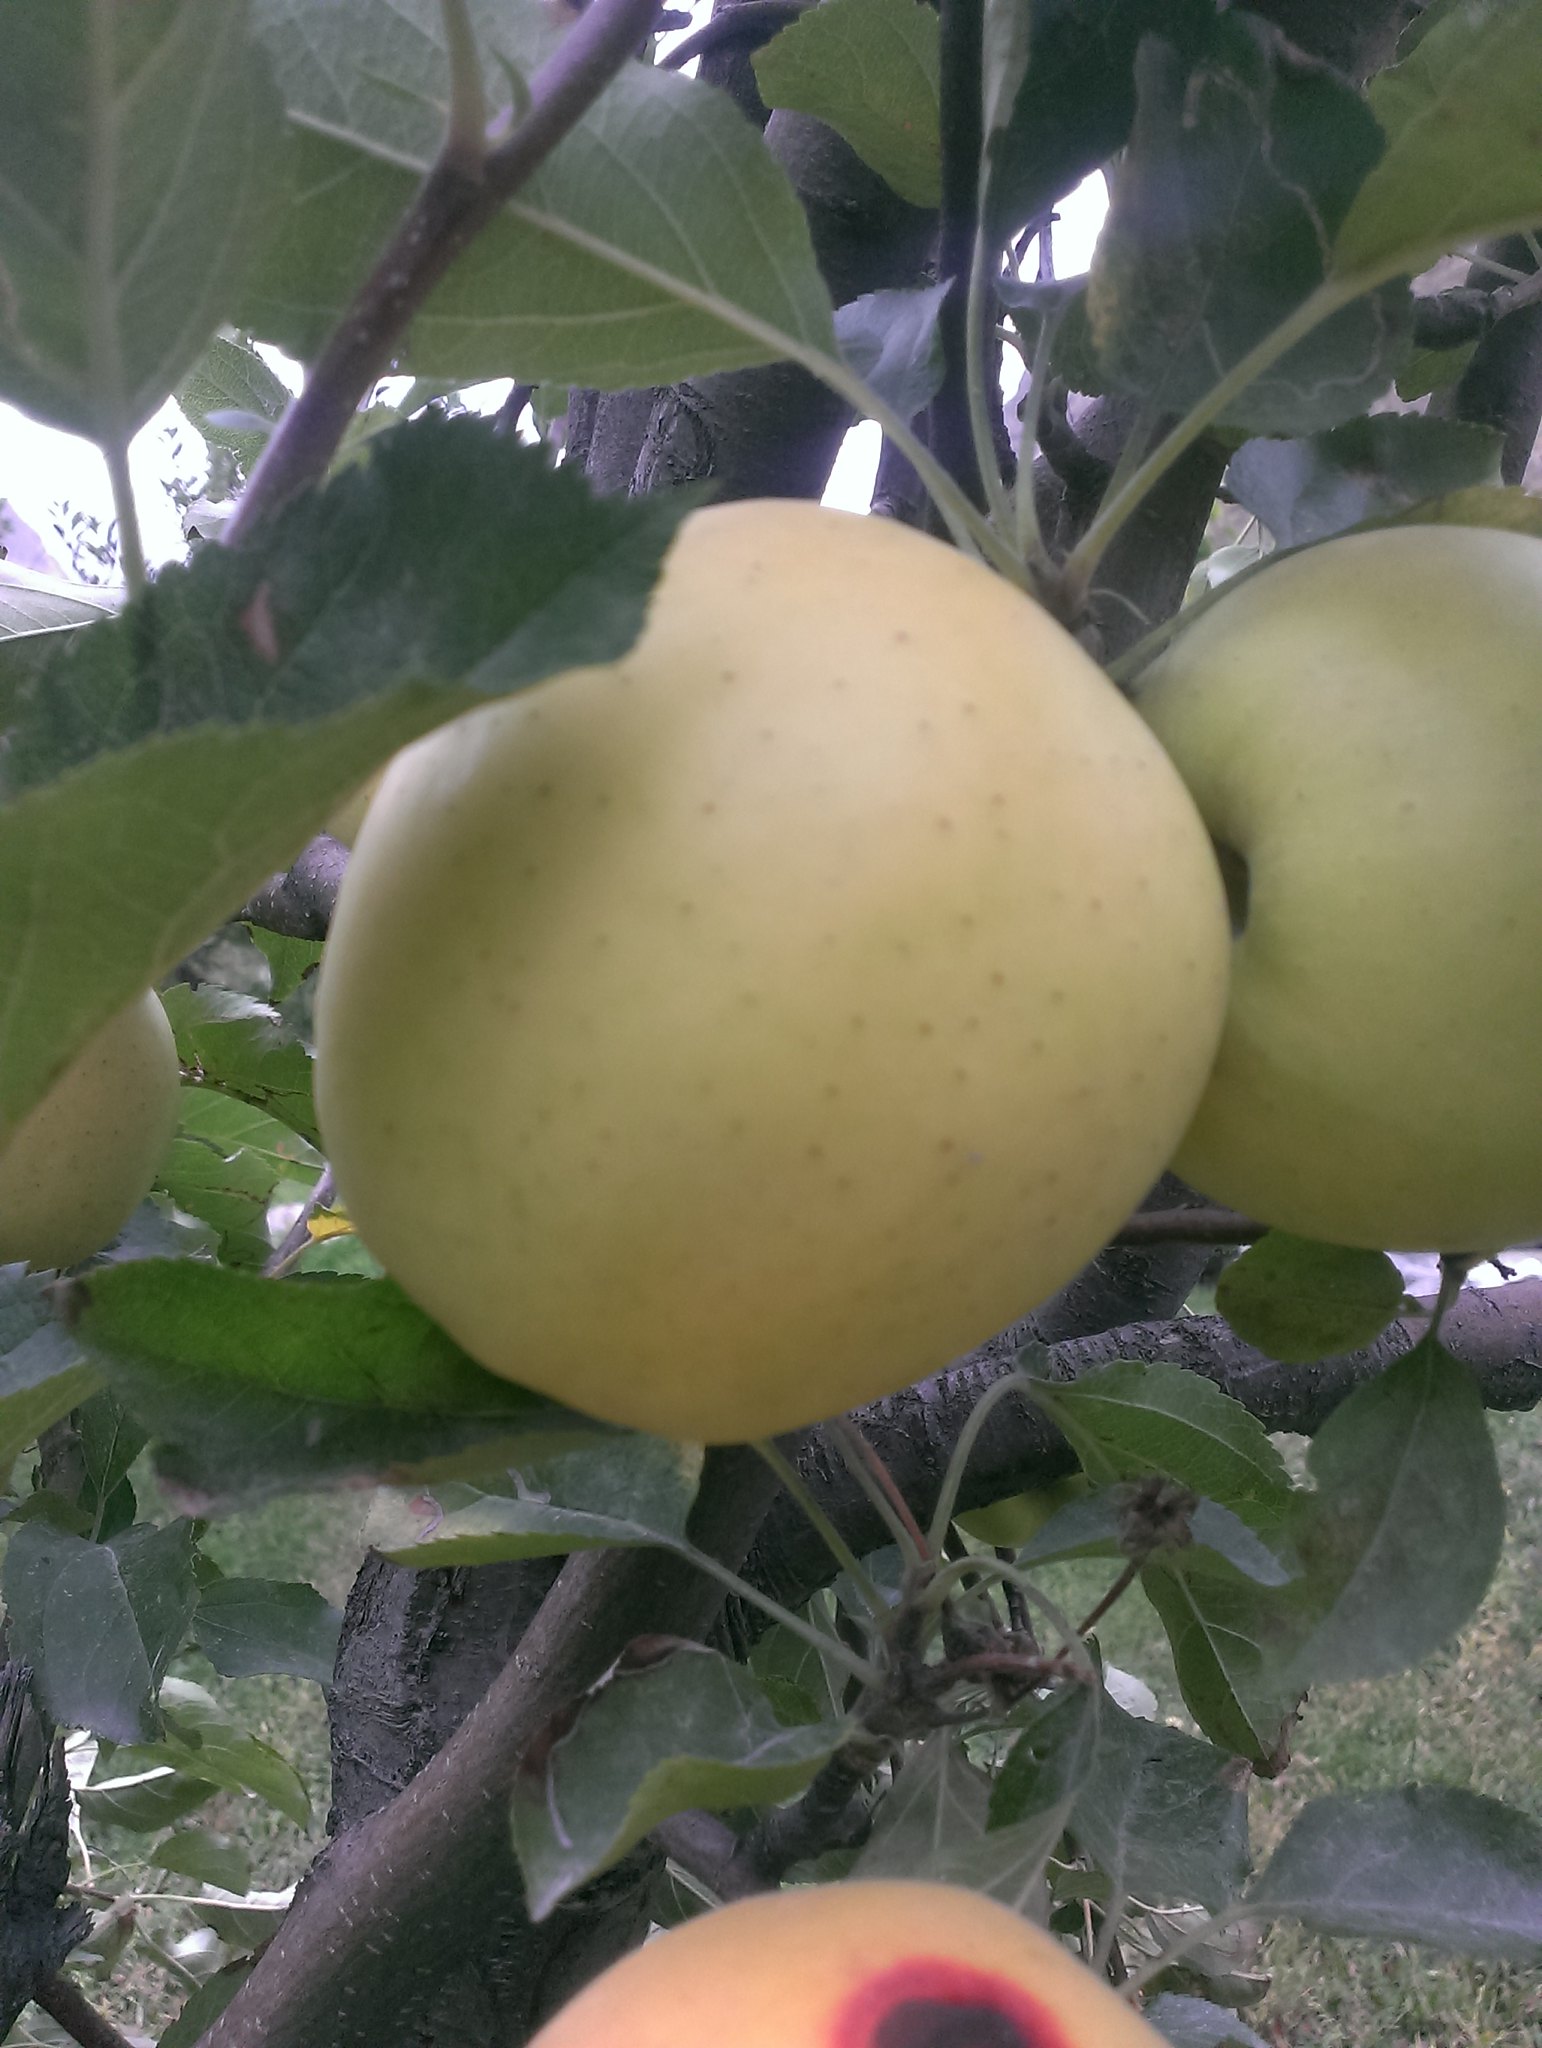 Apples from Hunza